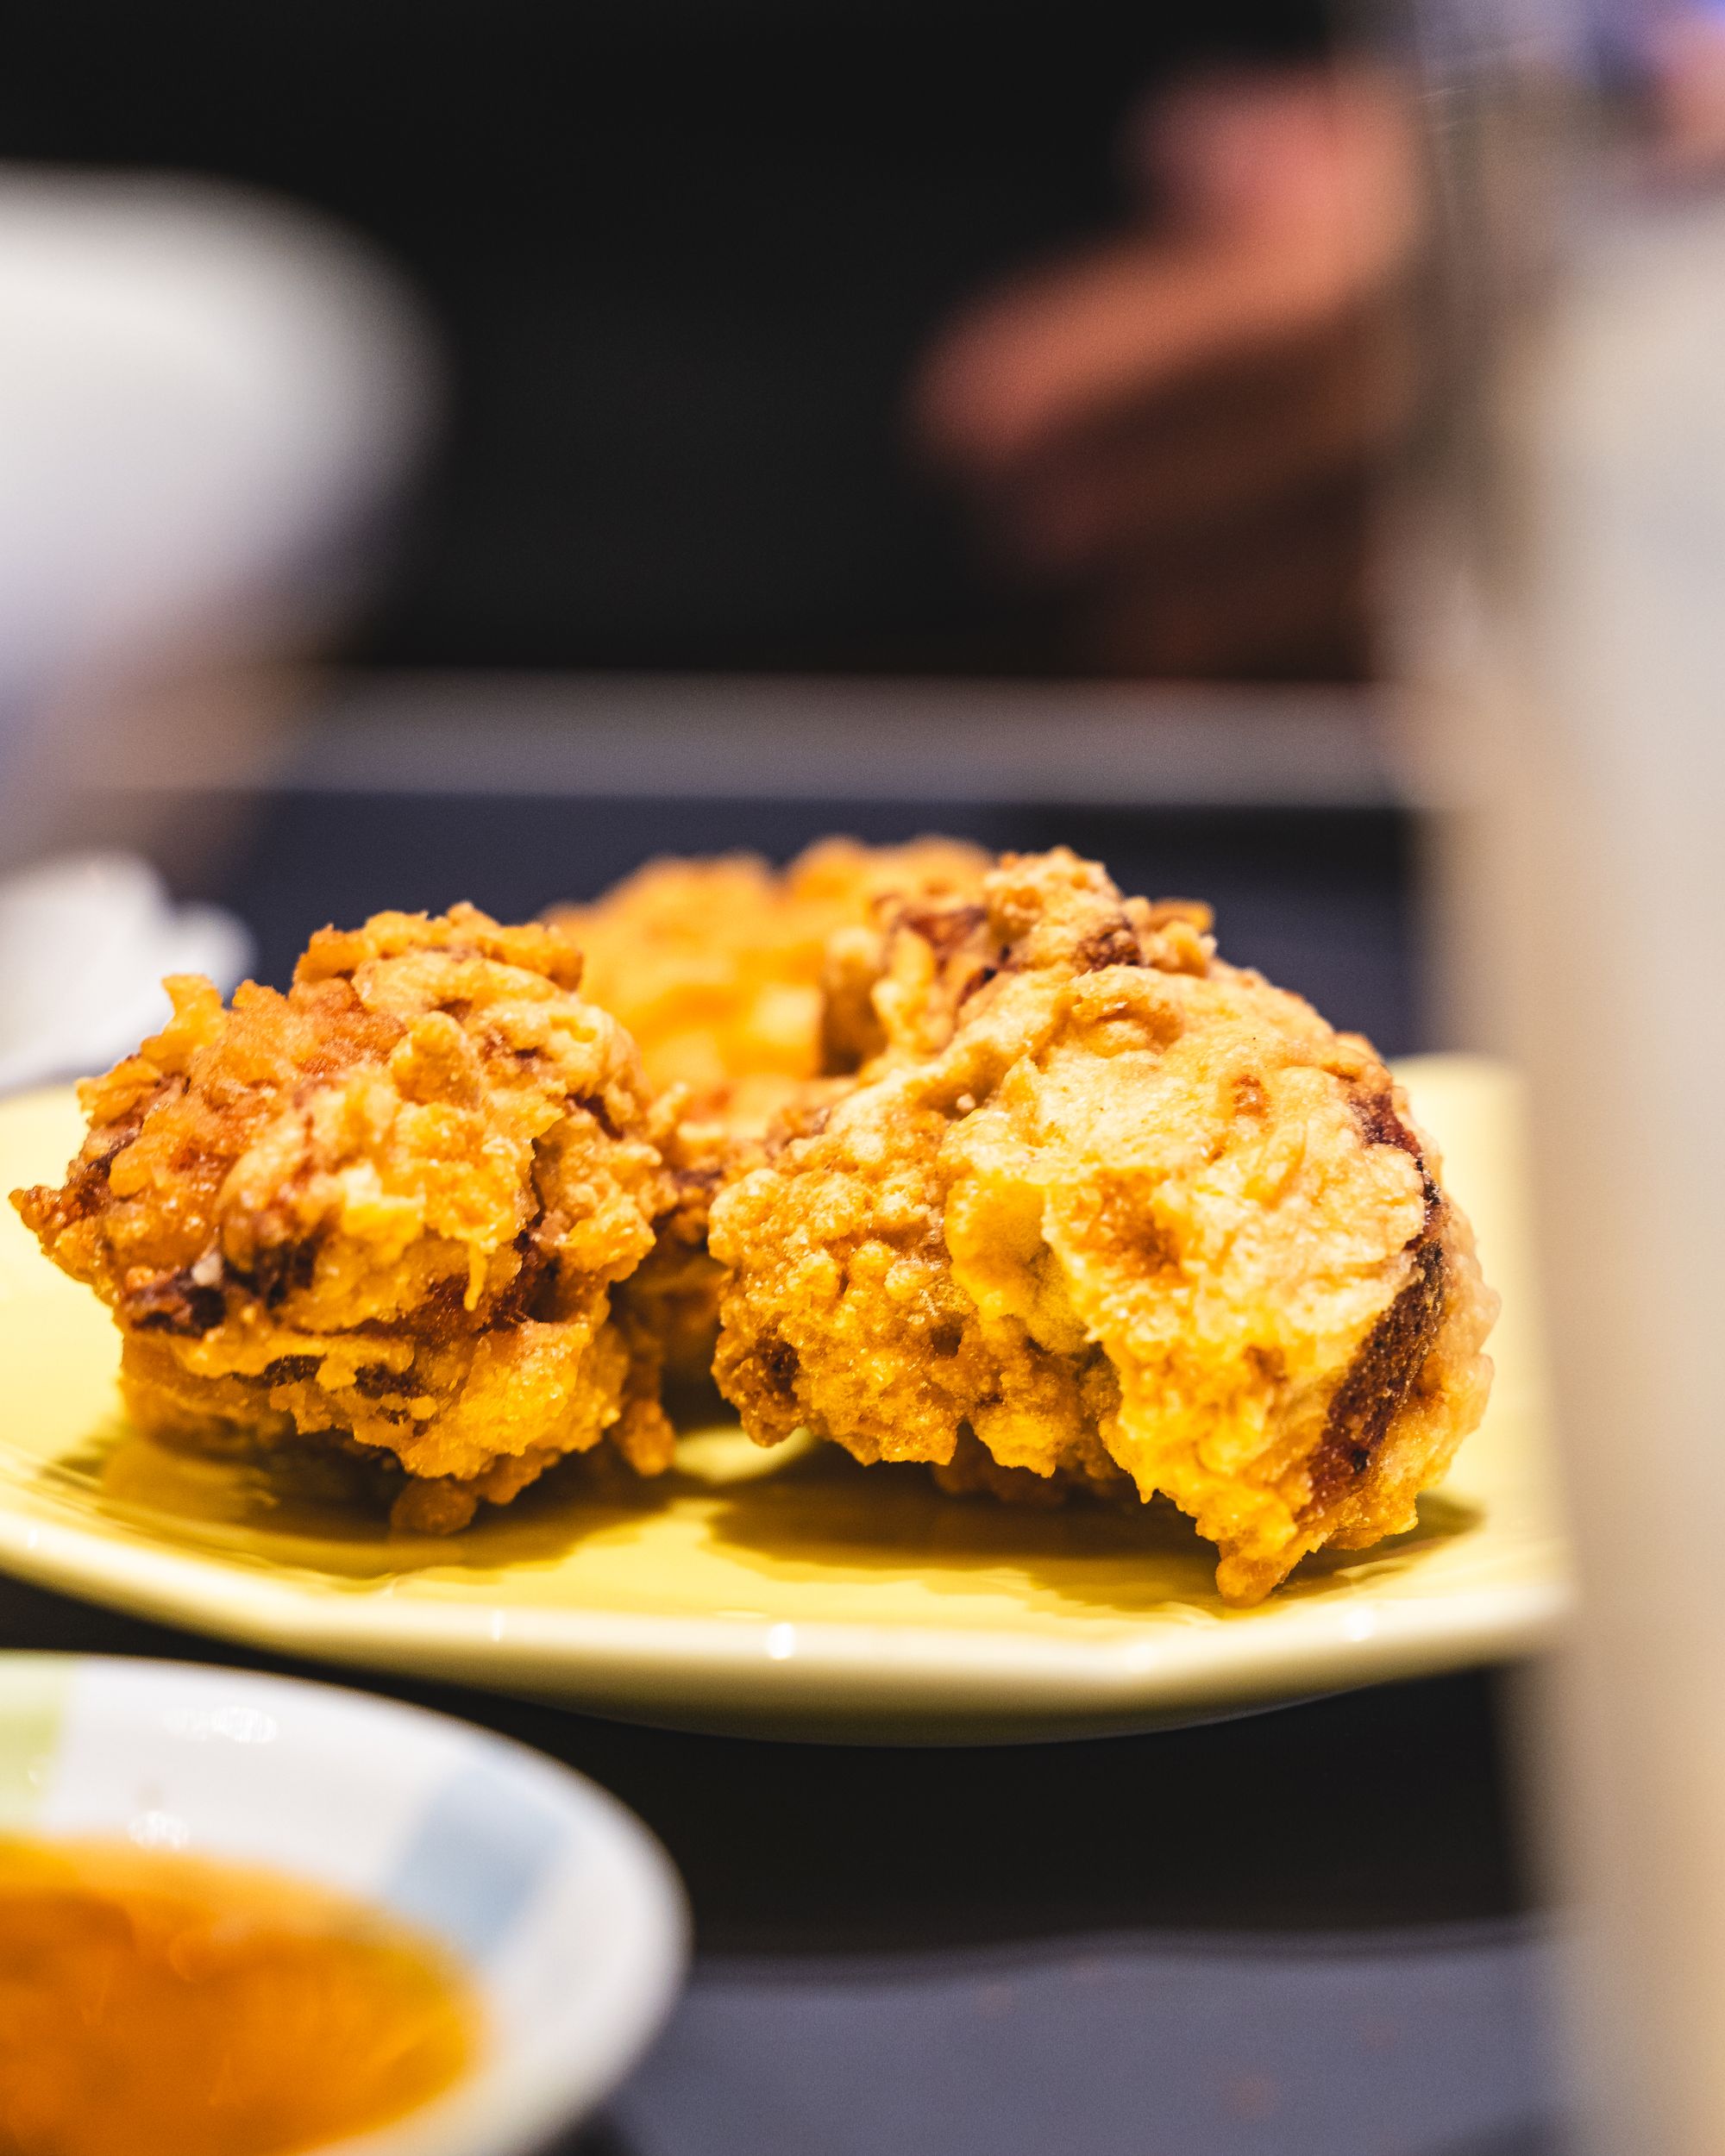 Japanese fried chicken pieces on a plate